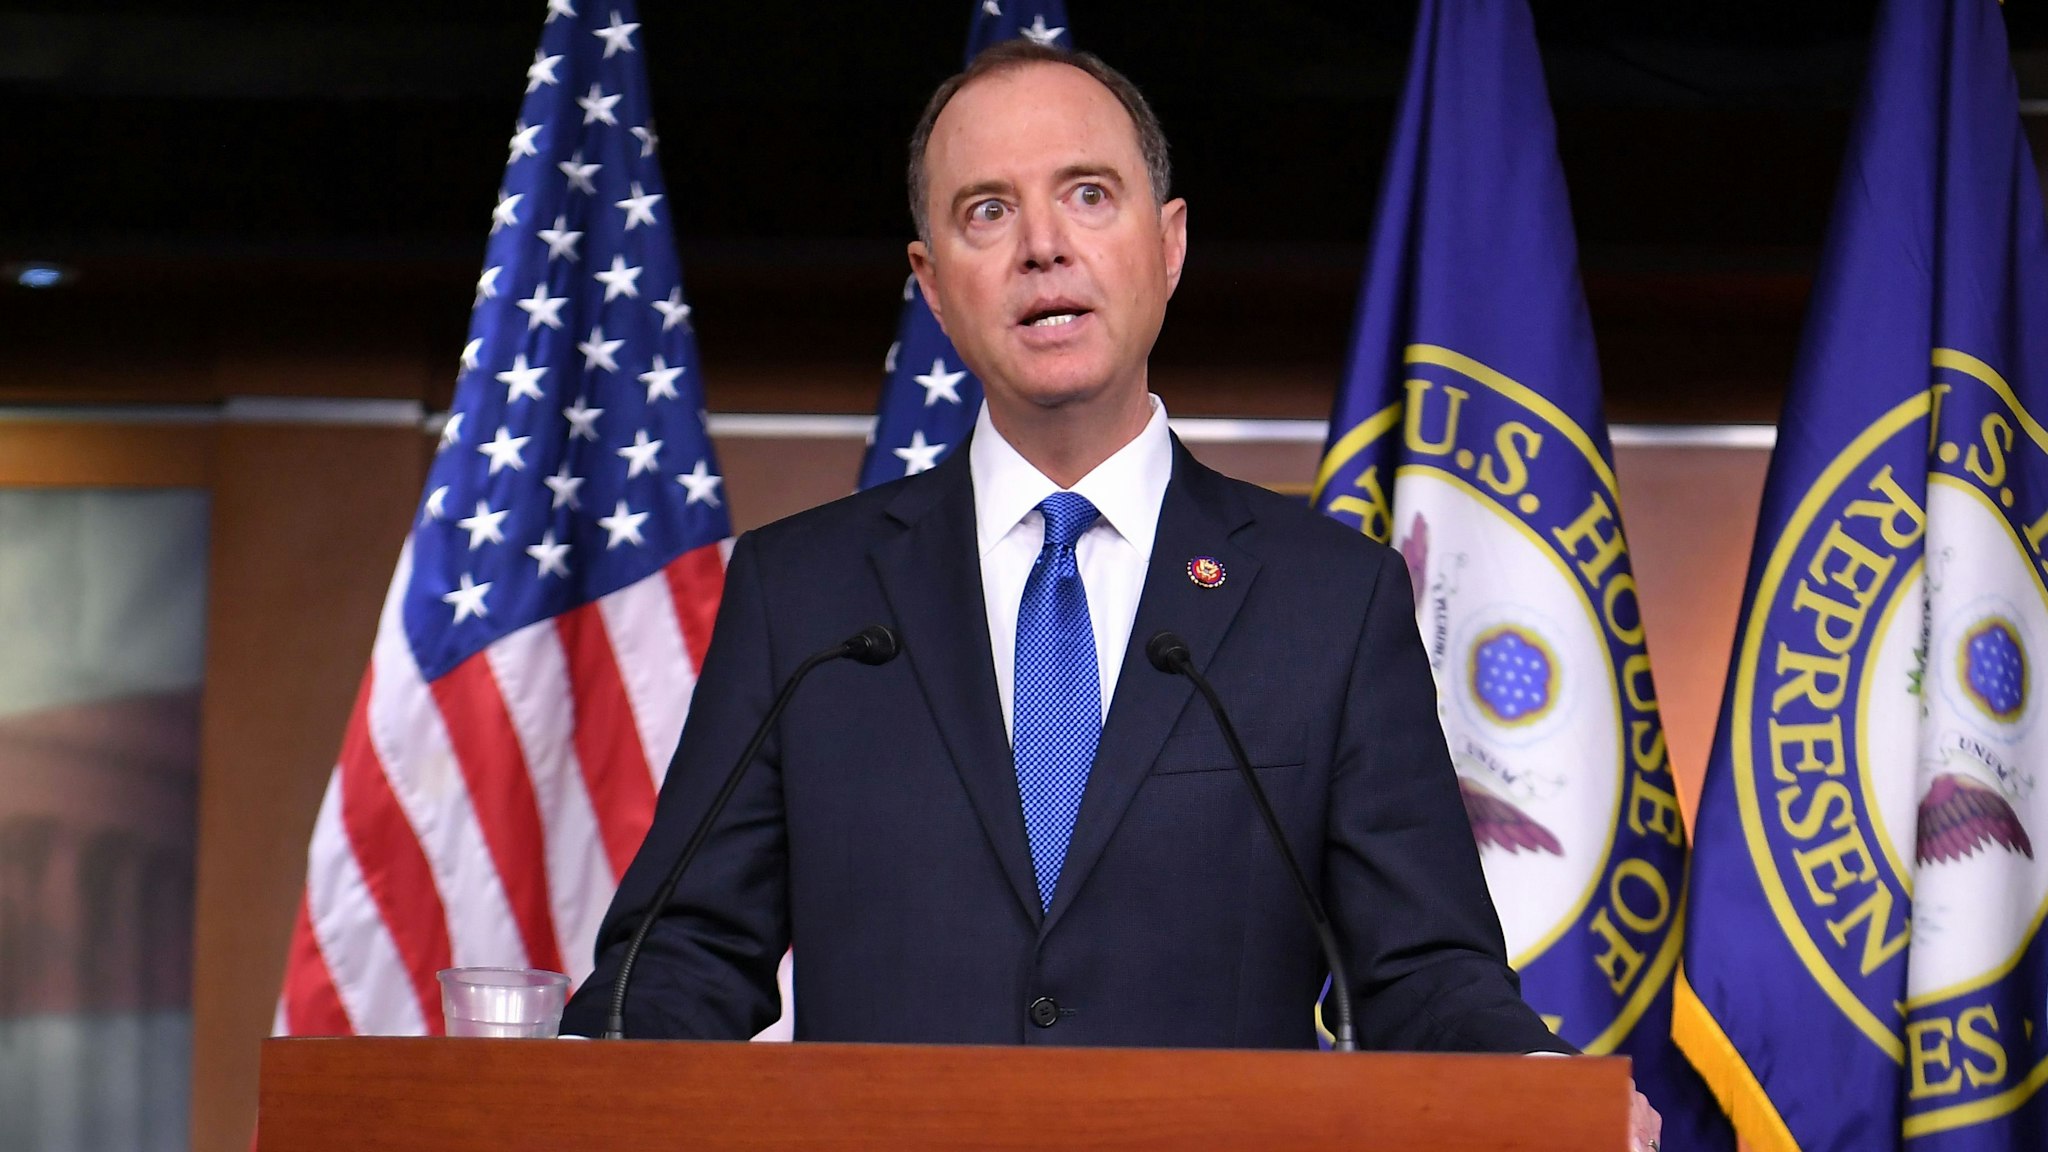 House Speaker Nancy Pelosi and House Intelligence Committee Chair Adam Schiff, D-CA, speak during a press conference in the House Studio of the US Capitol in Washington, DC on October 2, 2019.